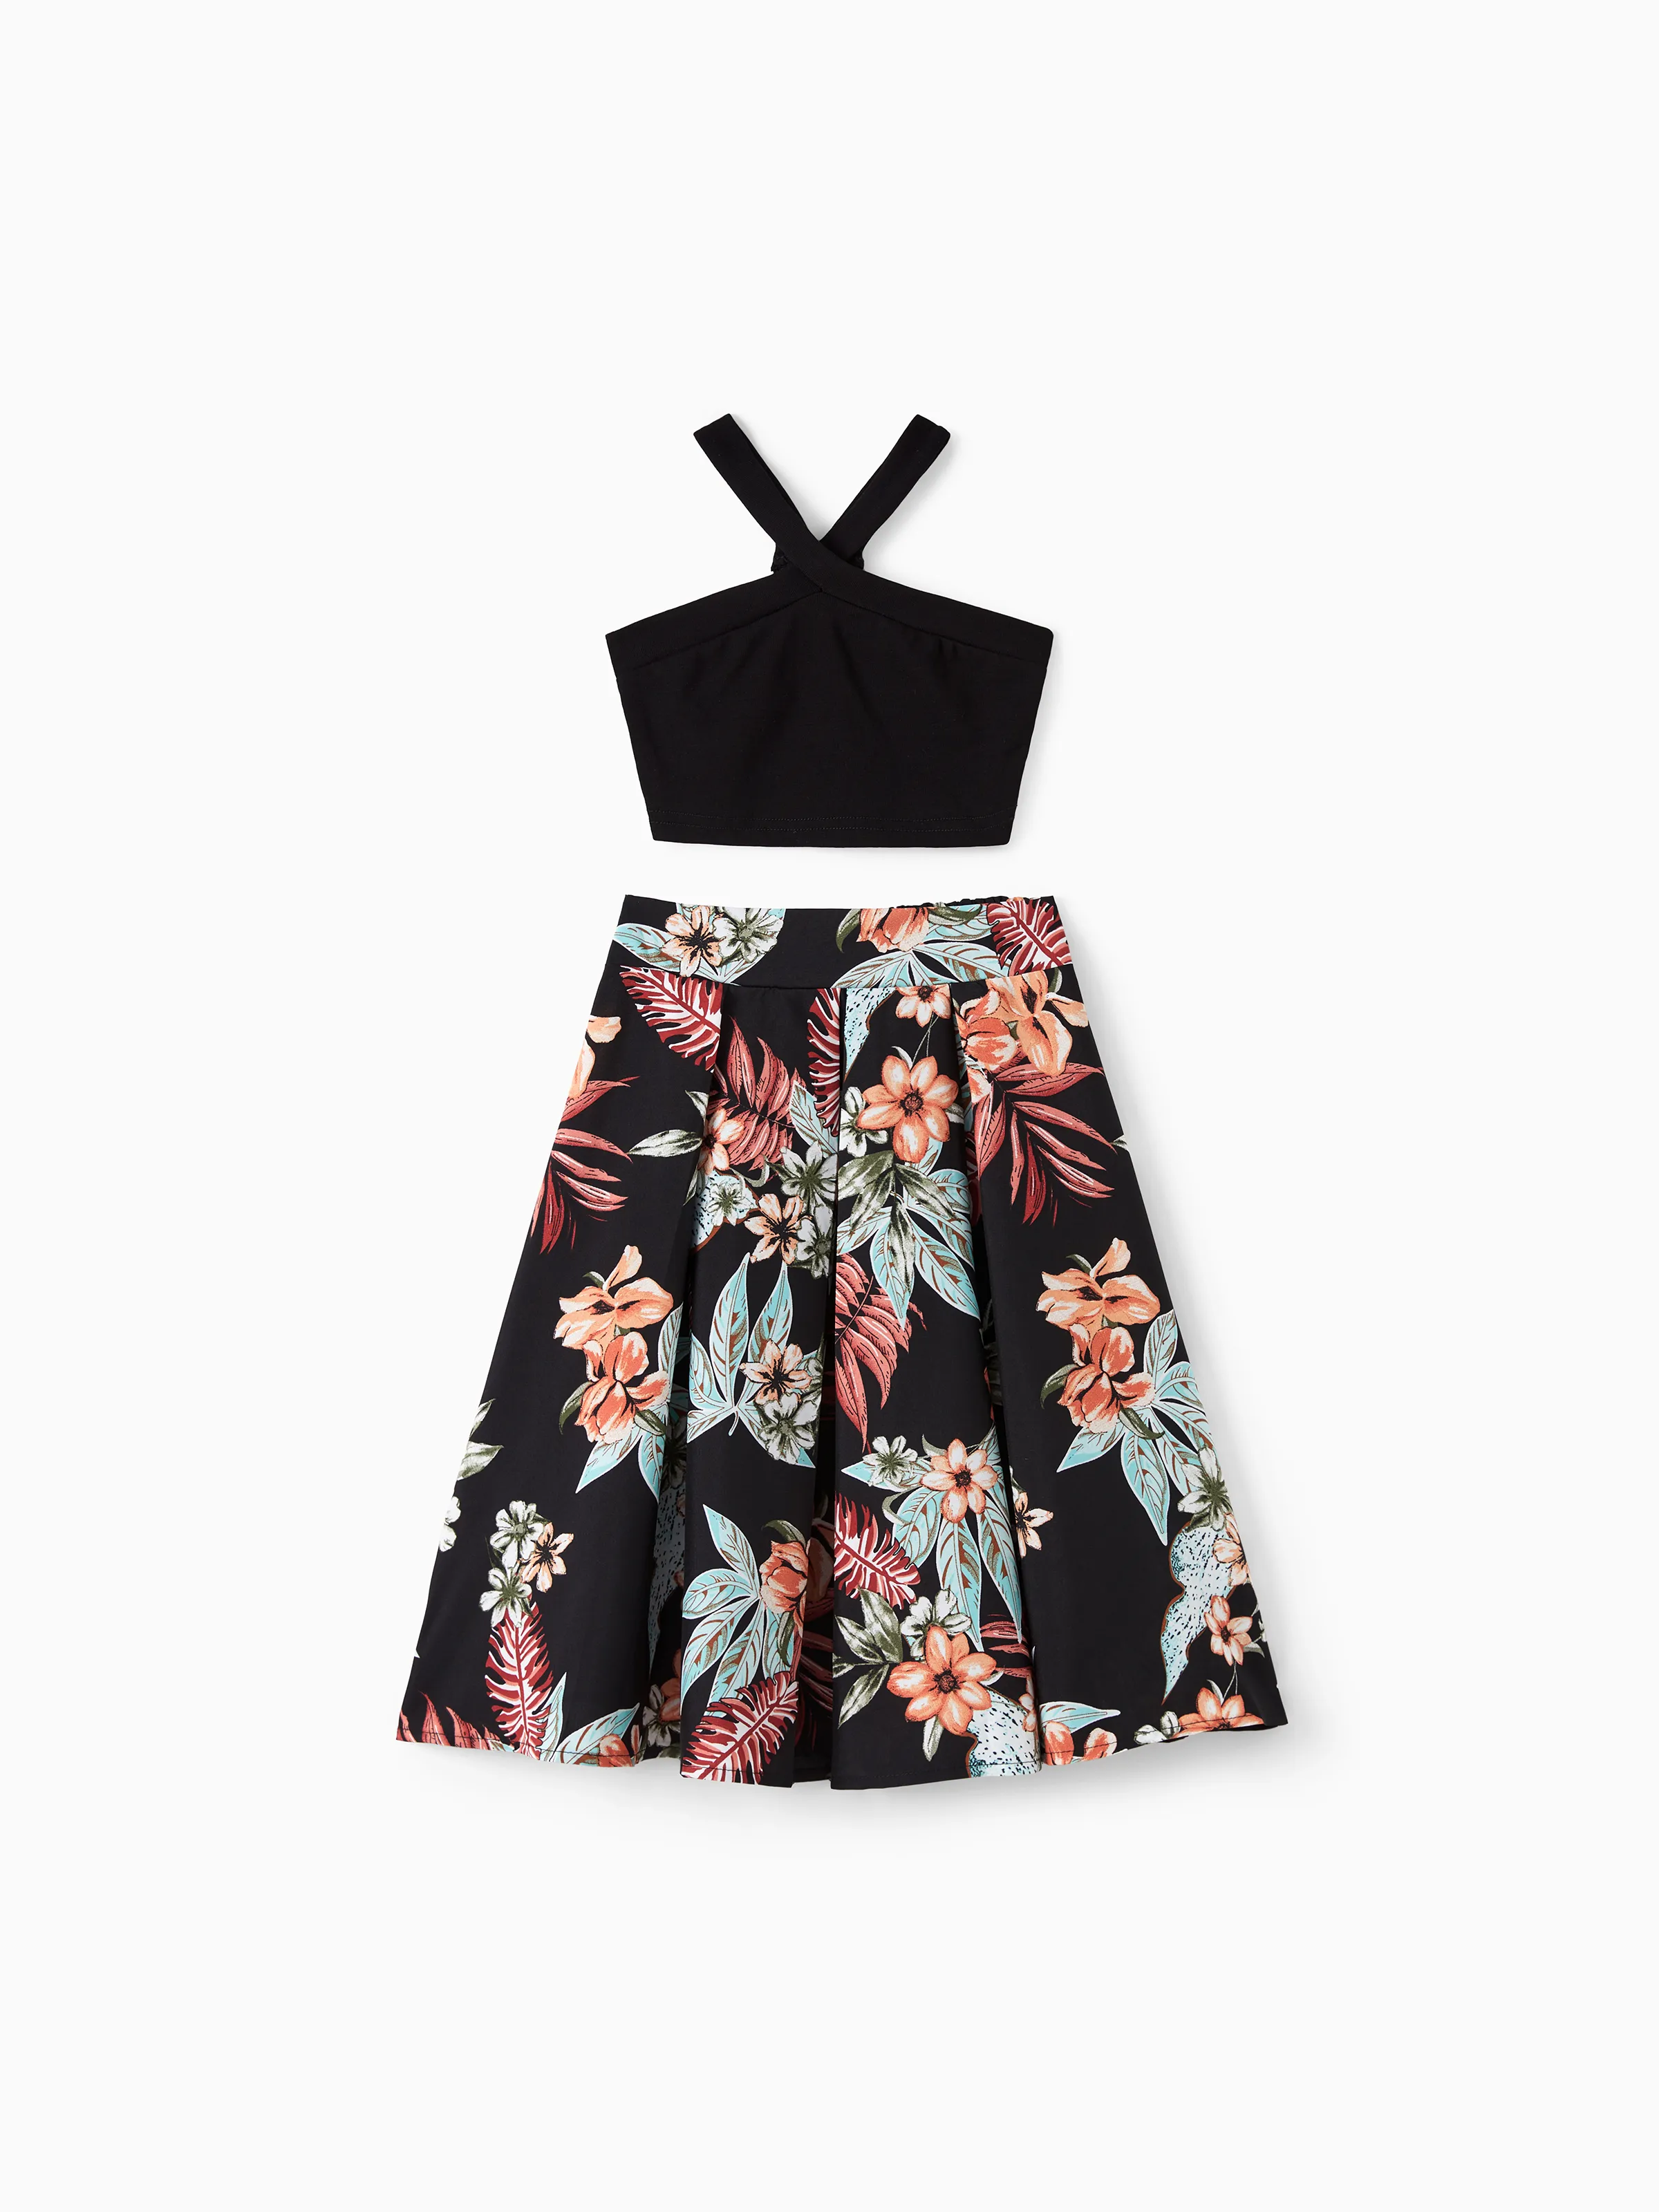 

Family Matching Sets Floral Beach Shirt or Cross top A-line Skirt Co-ord Set